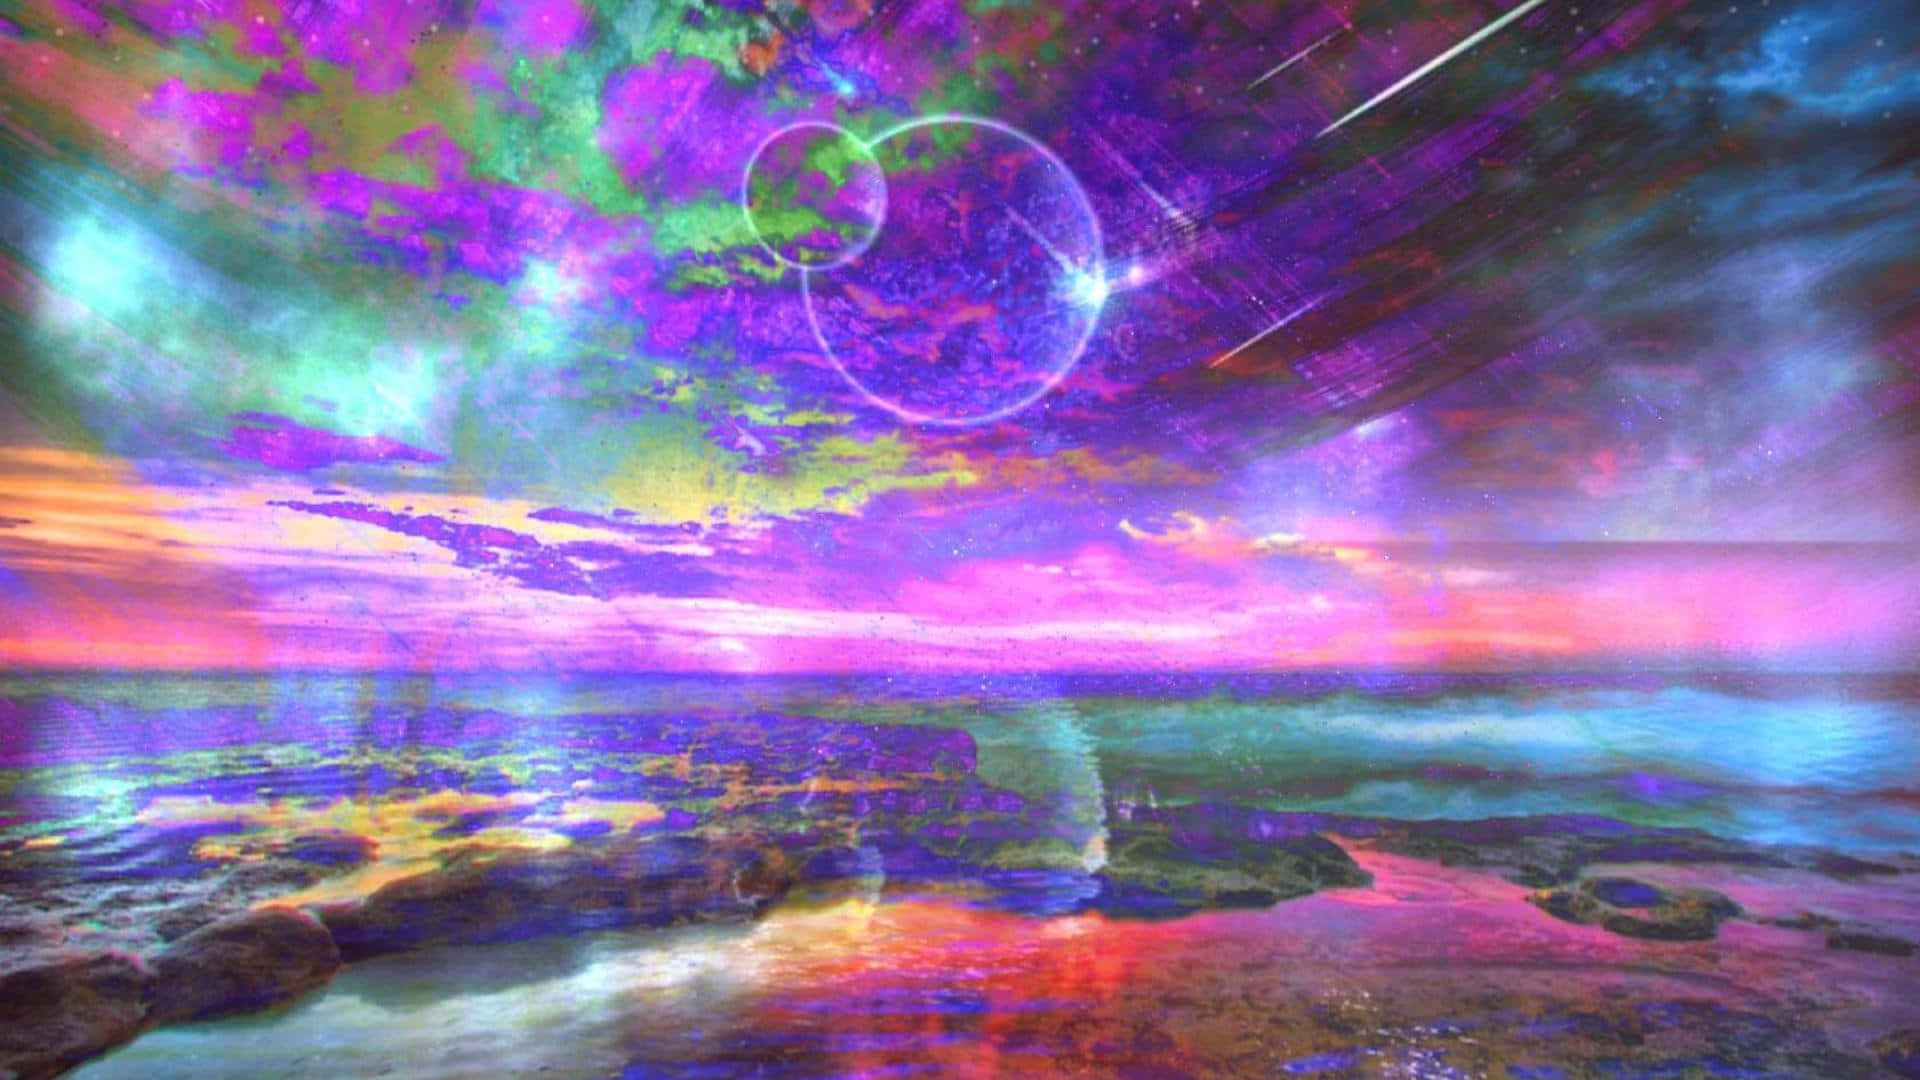 • “dive Into A Beautiful, Ethereal Psychedelic Space” Background